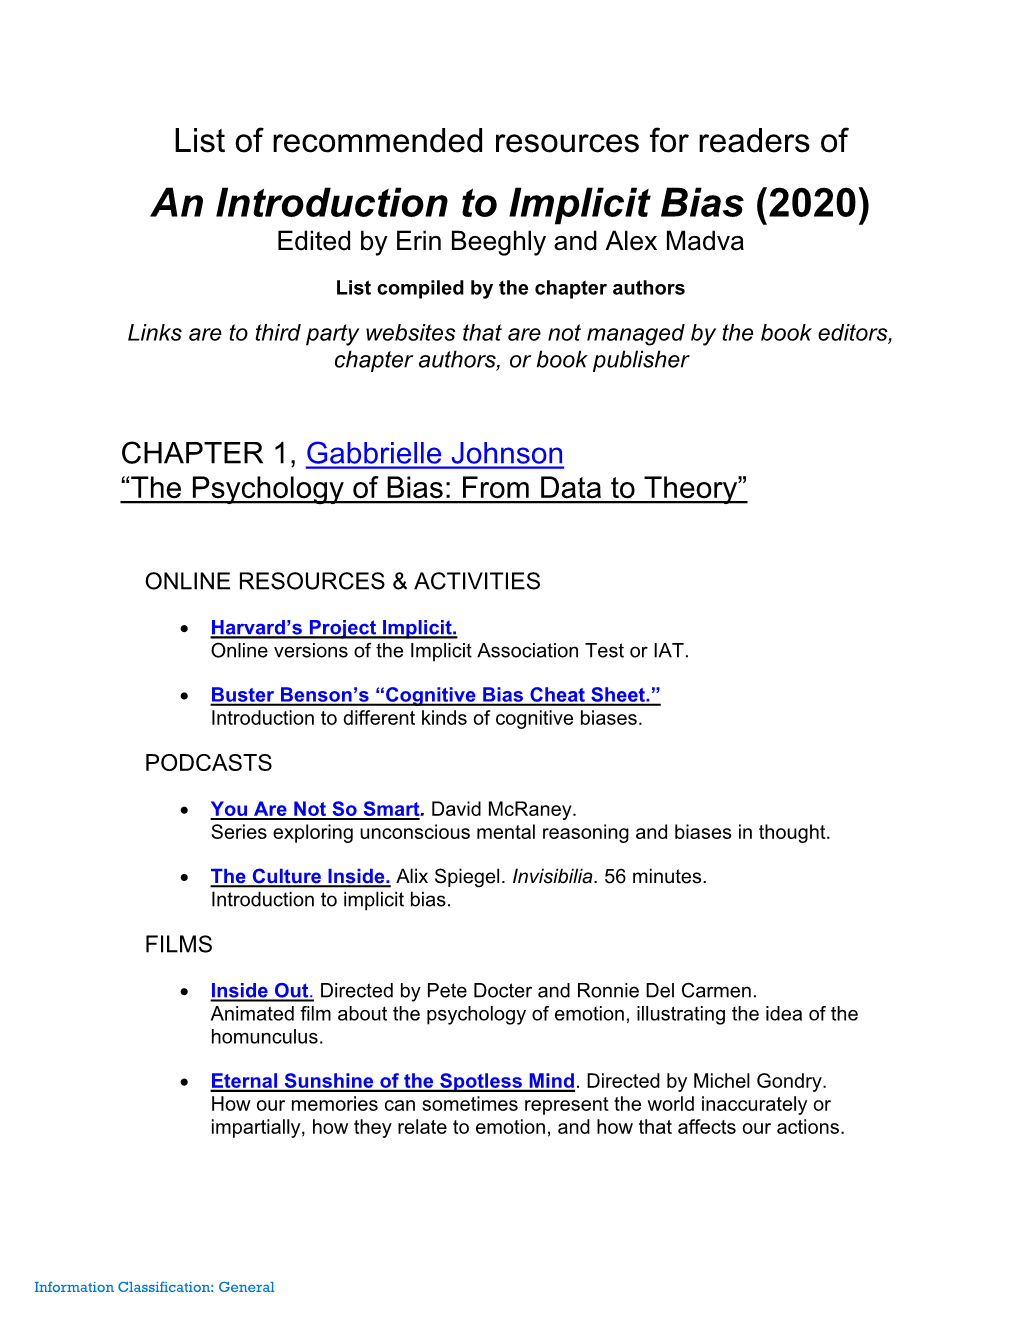 An Introduction to Implicit Bias (2020) Edited by Erin Beeghly and Alex Madva